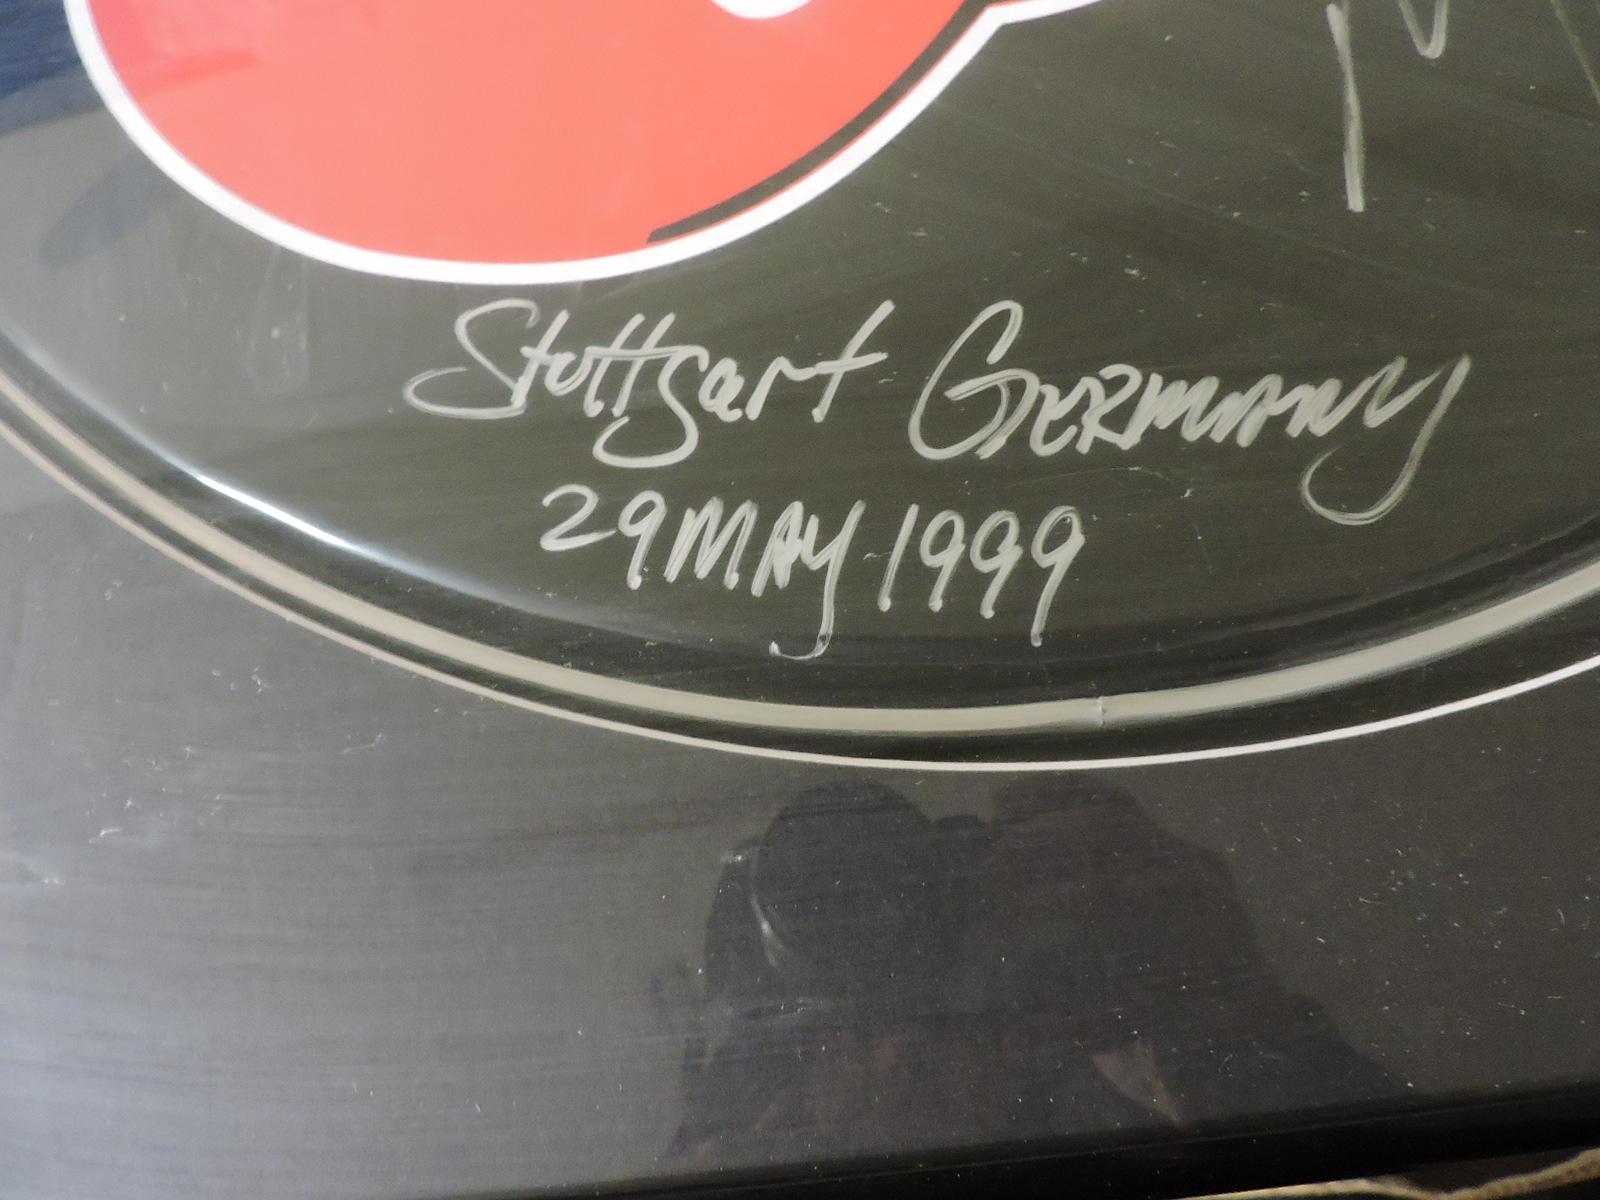 ROLLING STONES - Autographed Bass Drum Head - 22" - in Frame